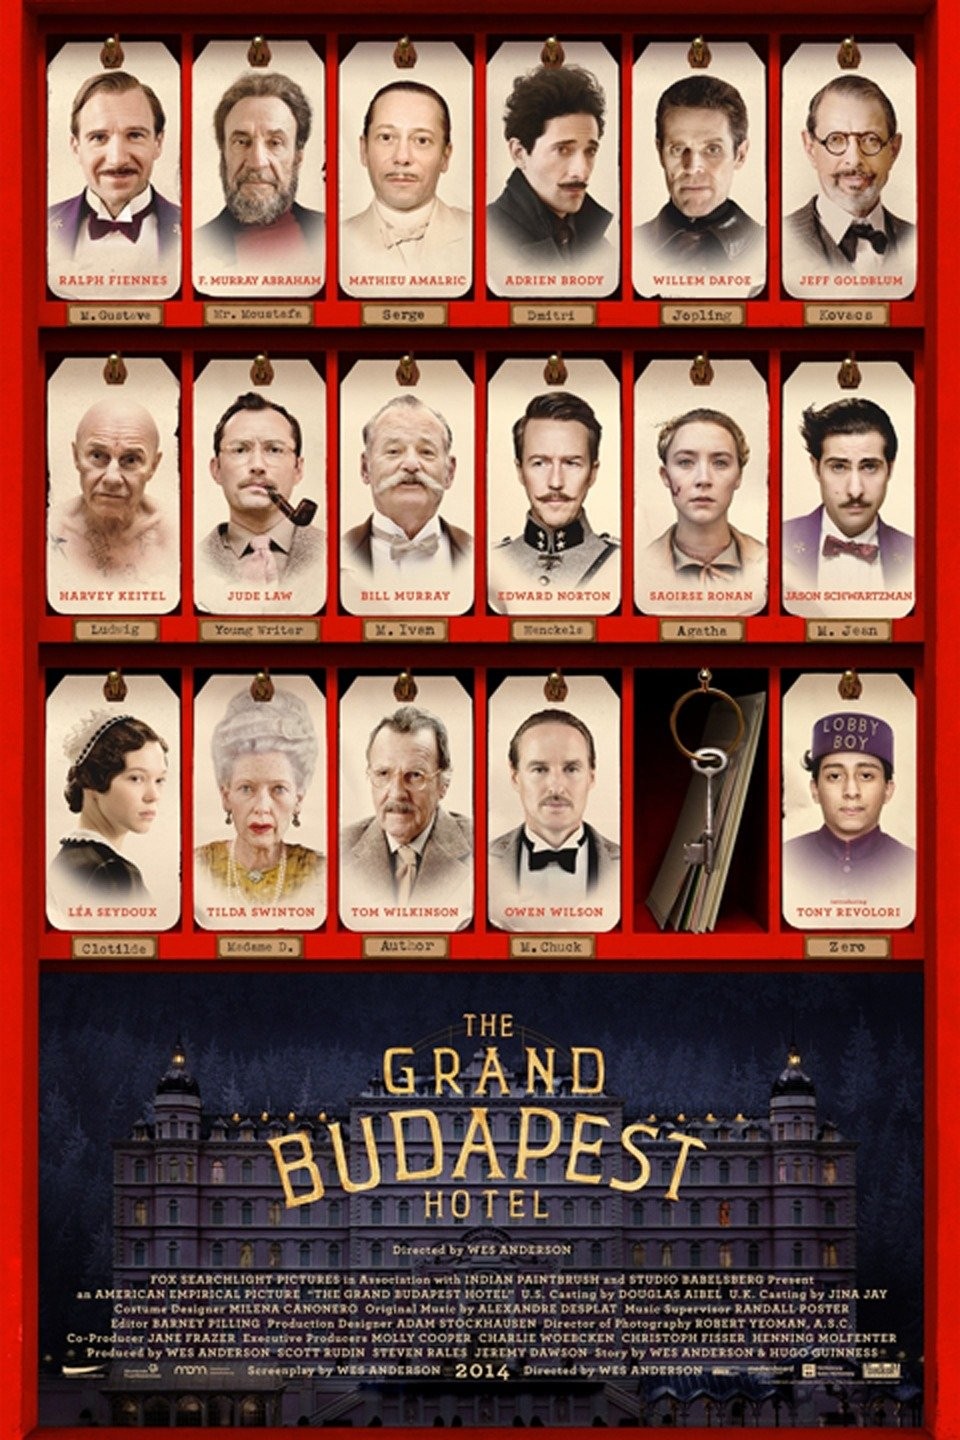 Film Review: Wes Anderson's 'The Grand Budapest Hotel' Is Superb